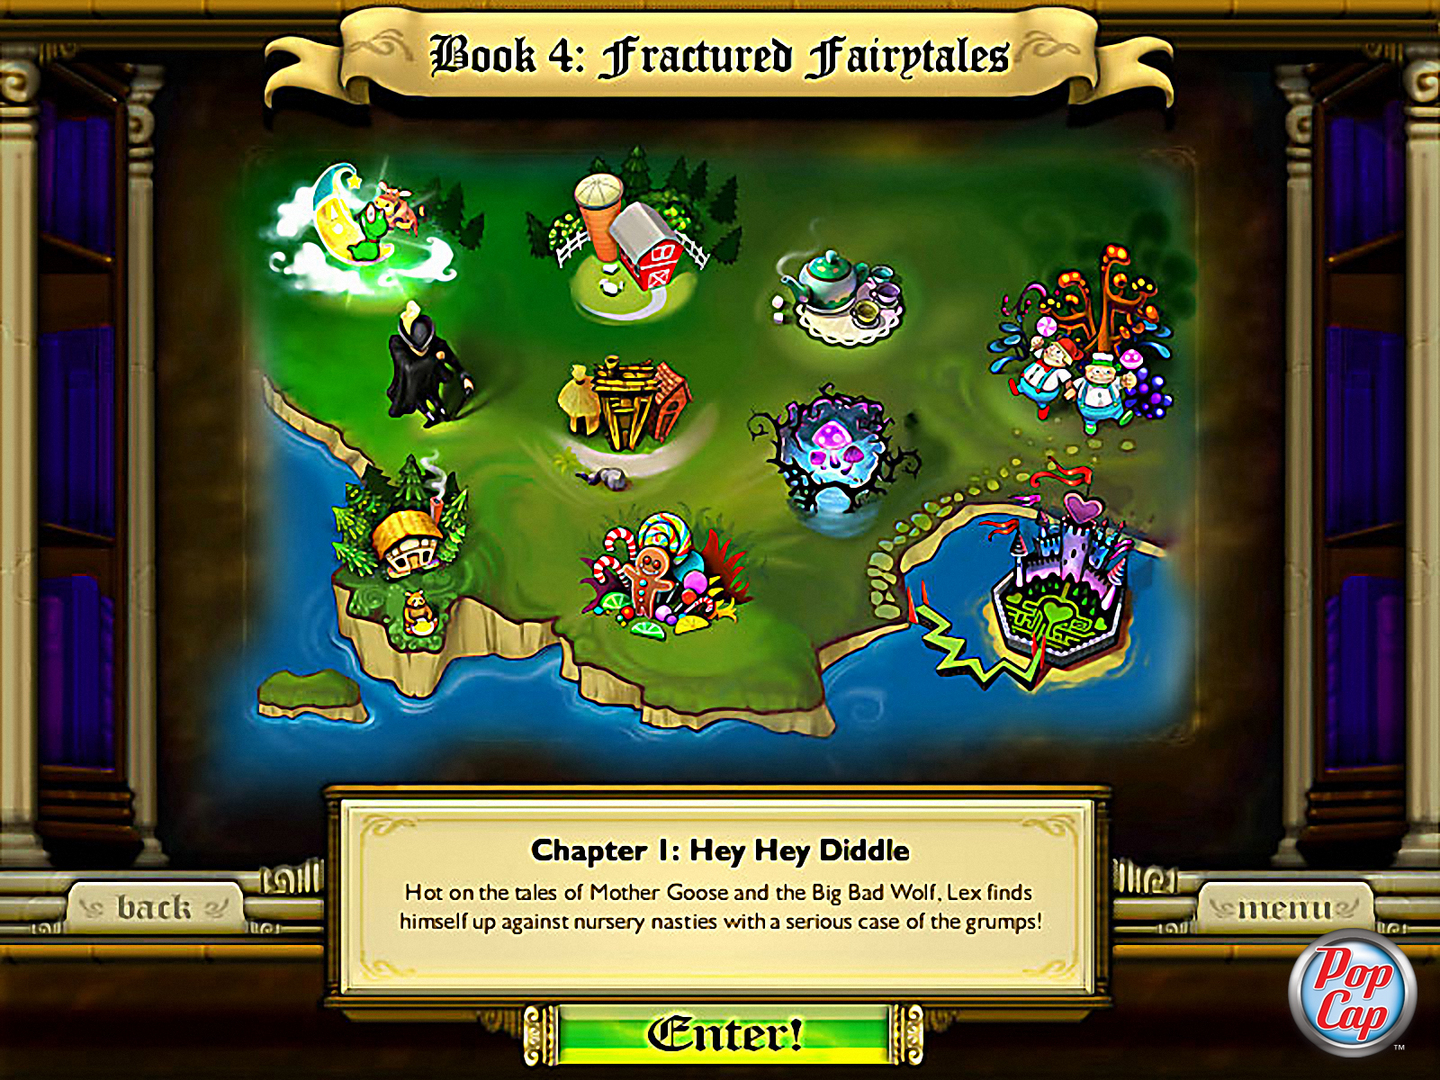 bookworm game online play